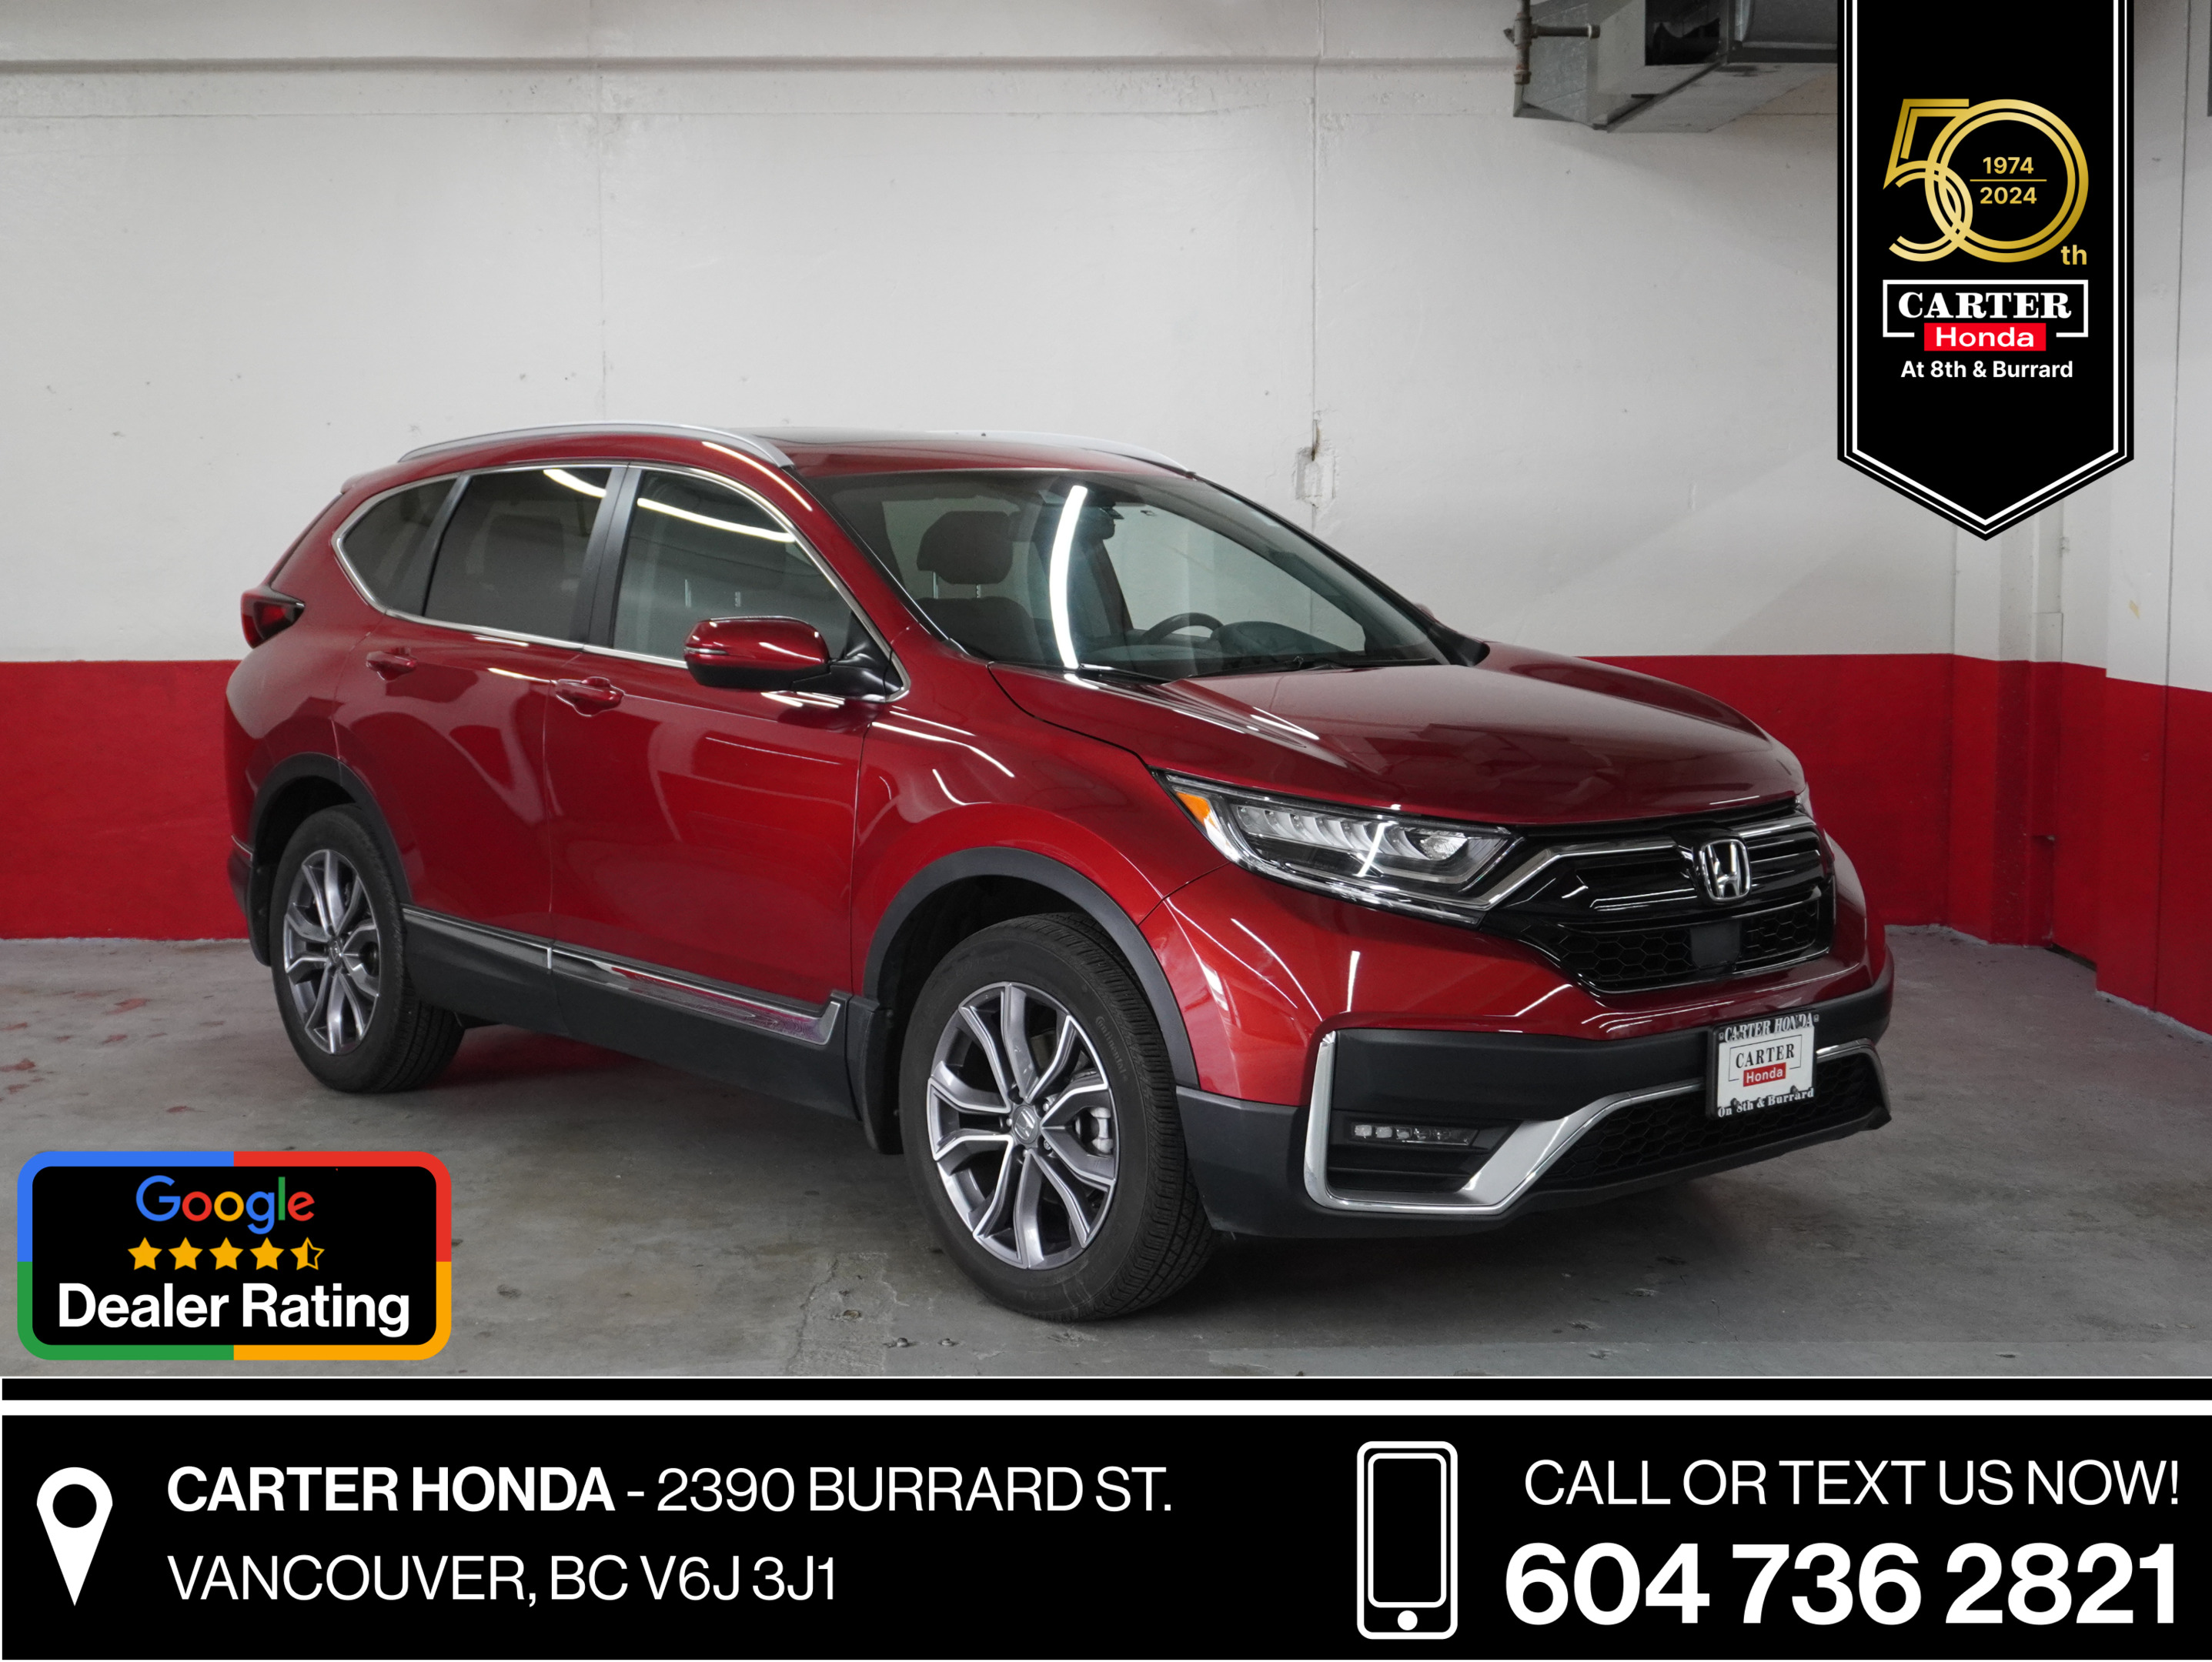 2021 Honda CR-V TOURING AWD, 0 ACCIDENTS, GPS, LEATHER, PANROOF